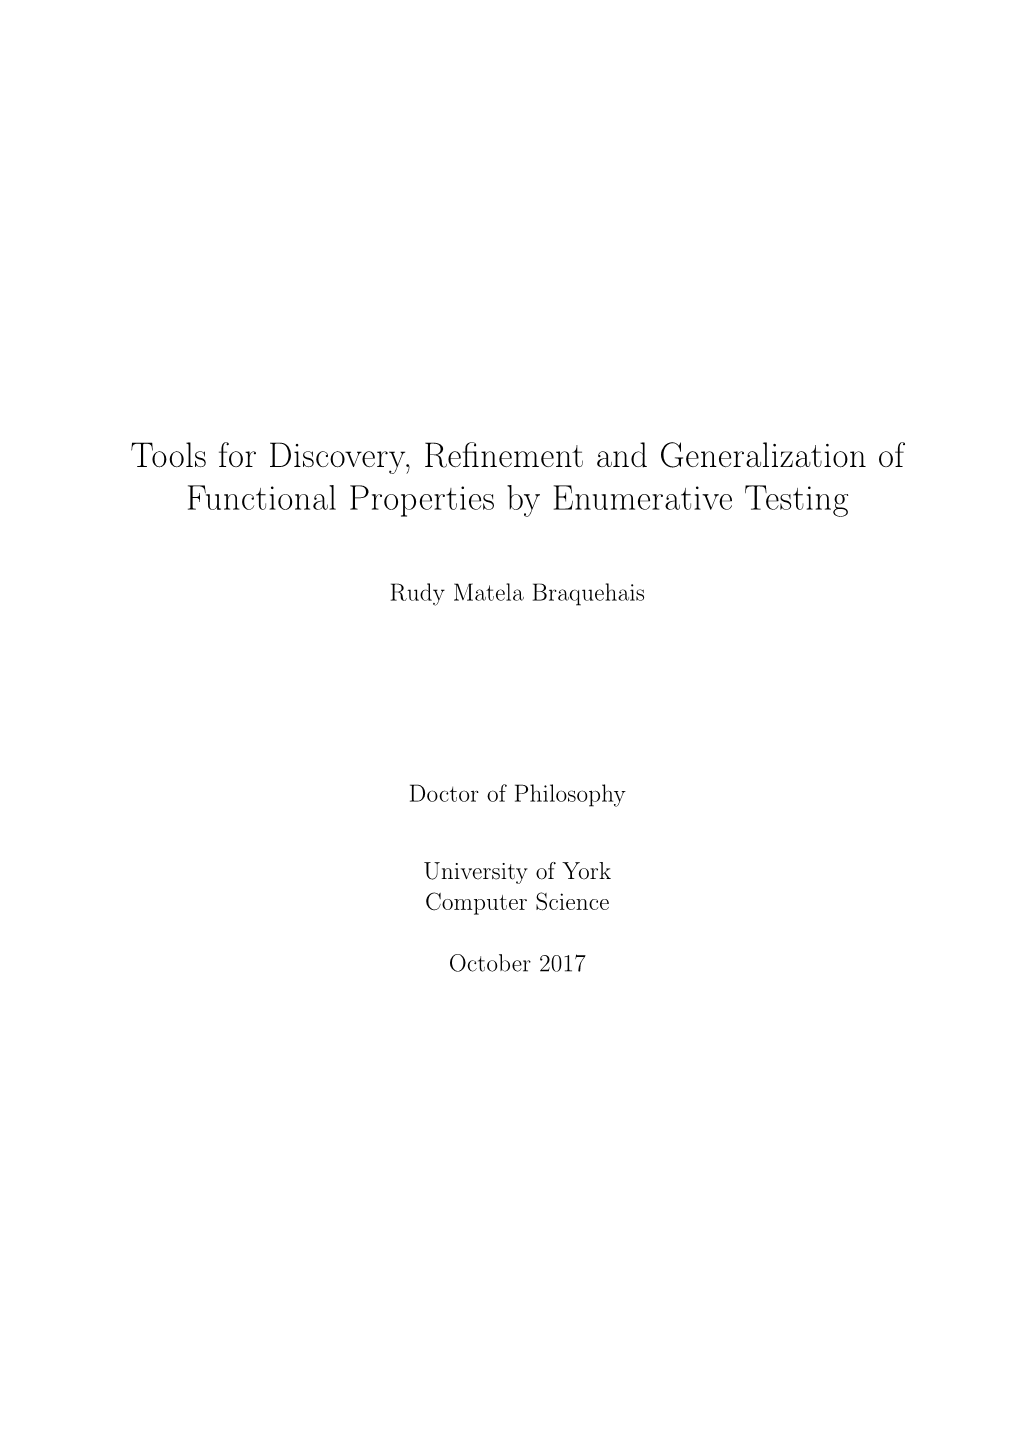 Tools for Discovery, Refinement and Generalization of Functional Properties by Enumerative Testing